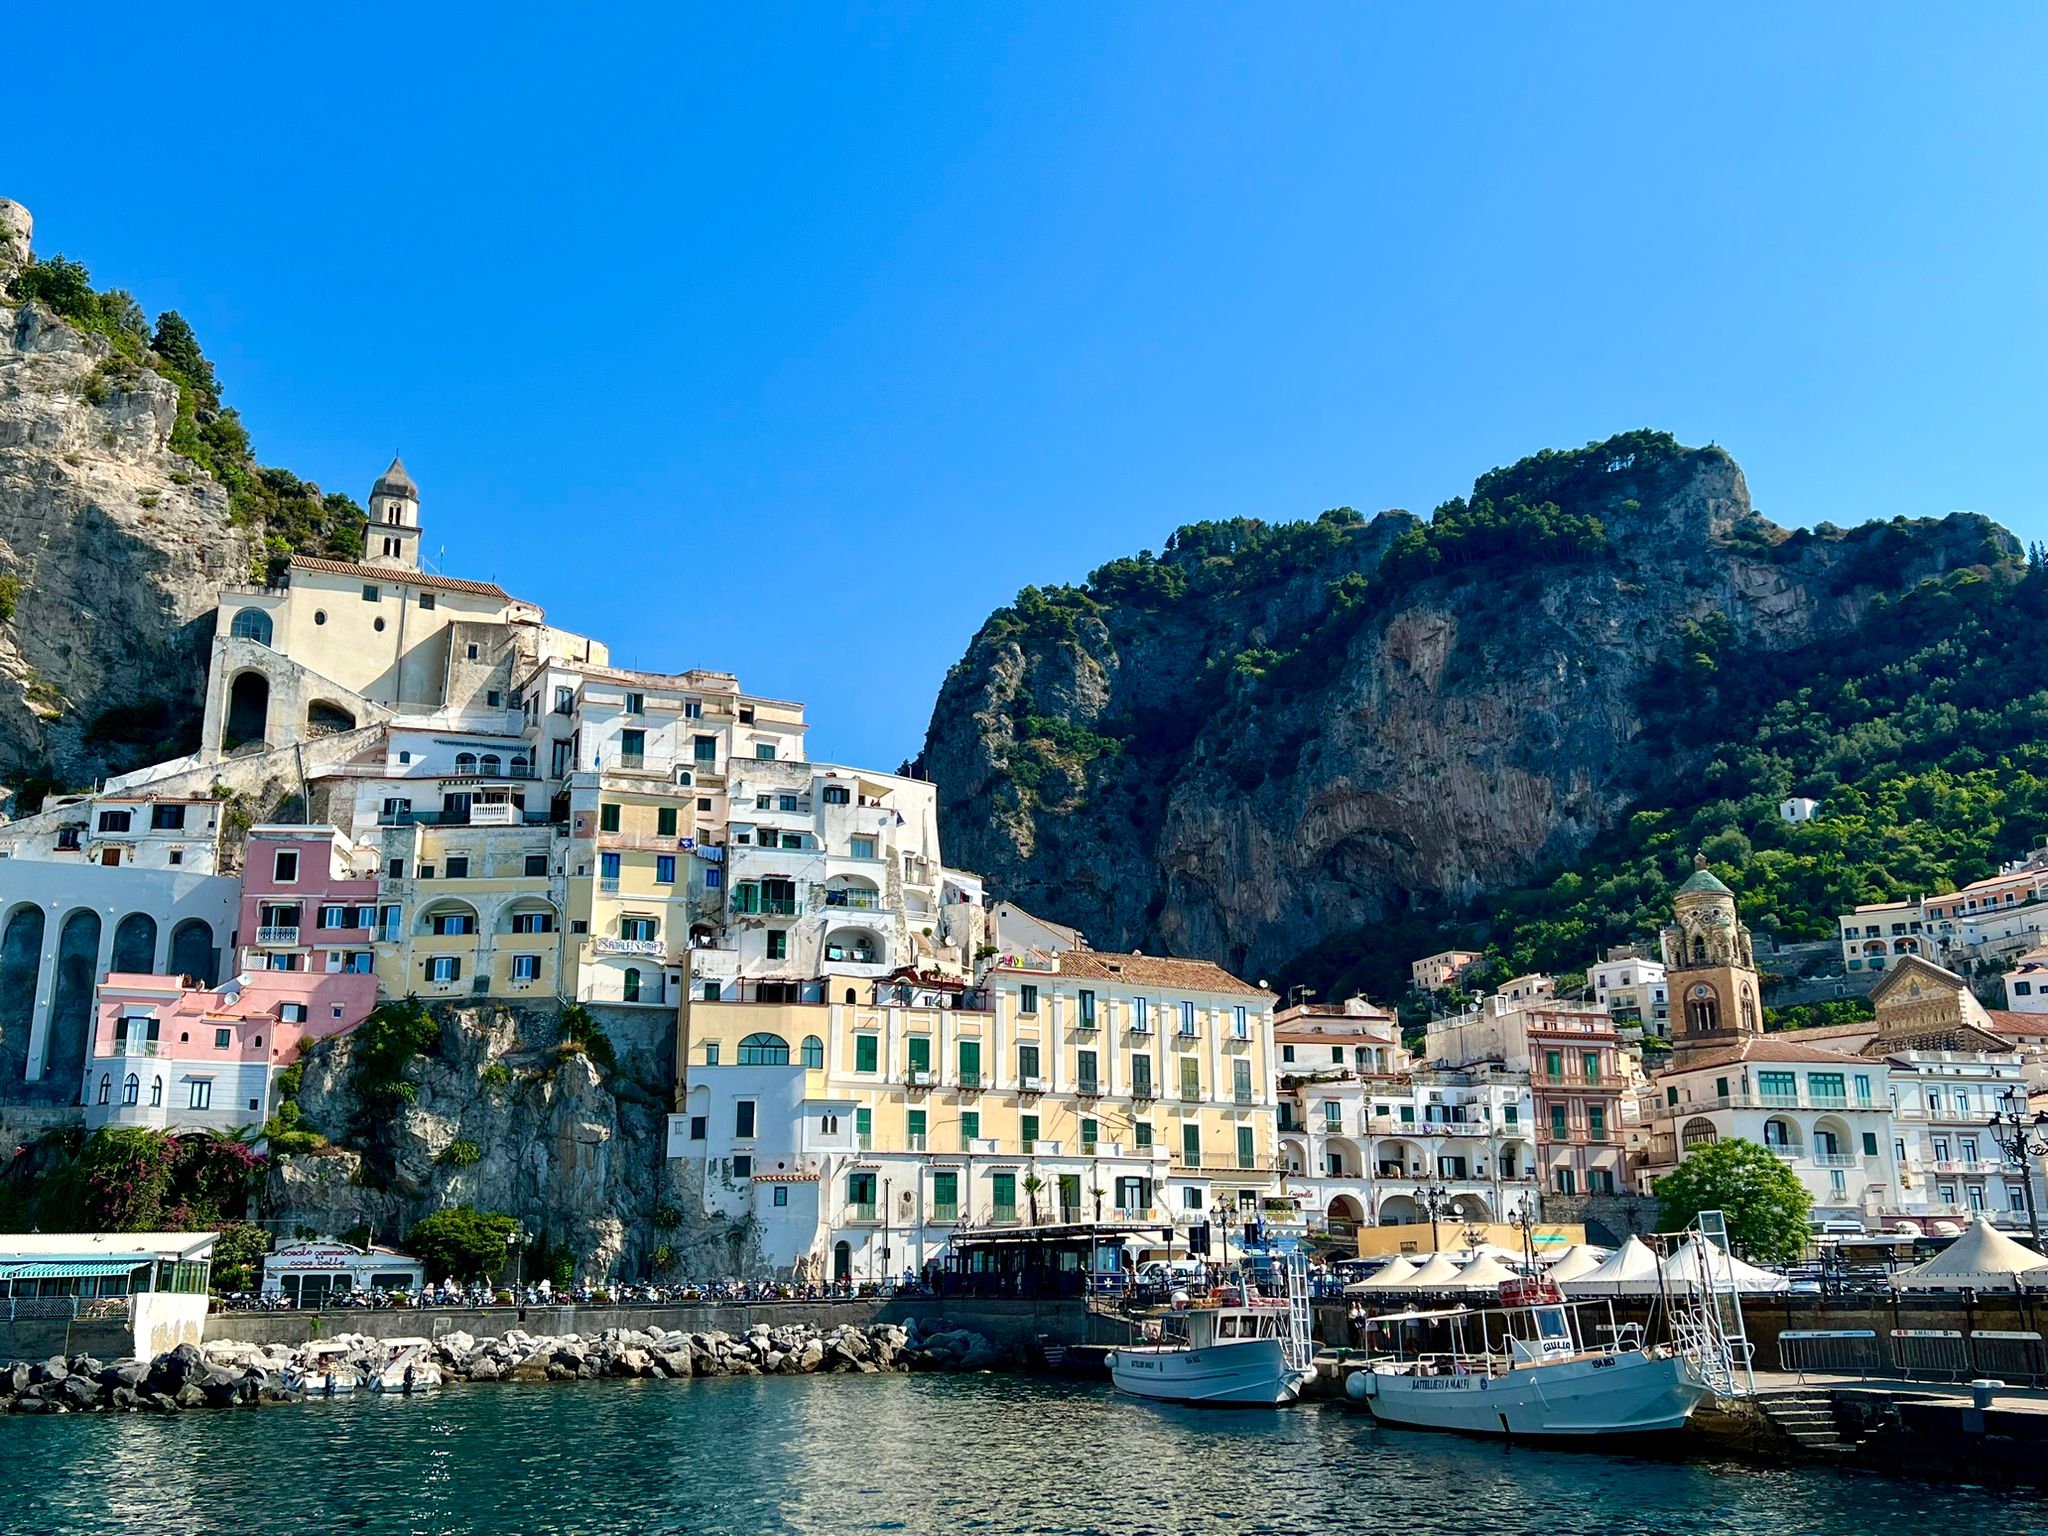 View of Amalfi from the water